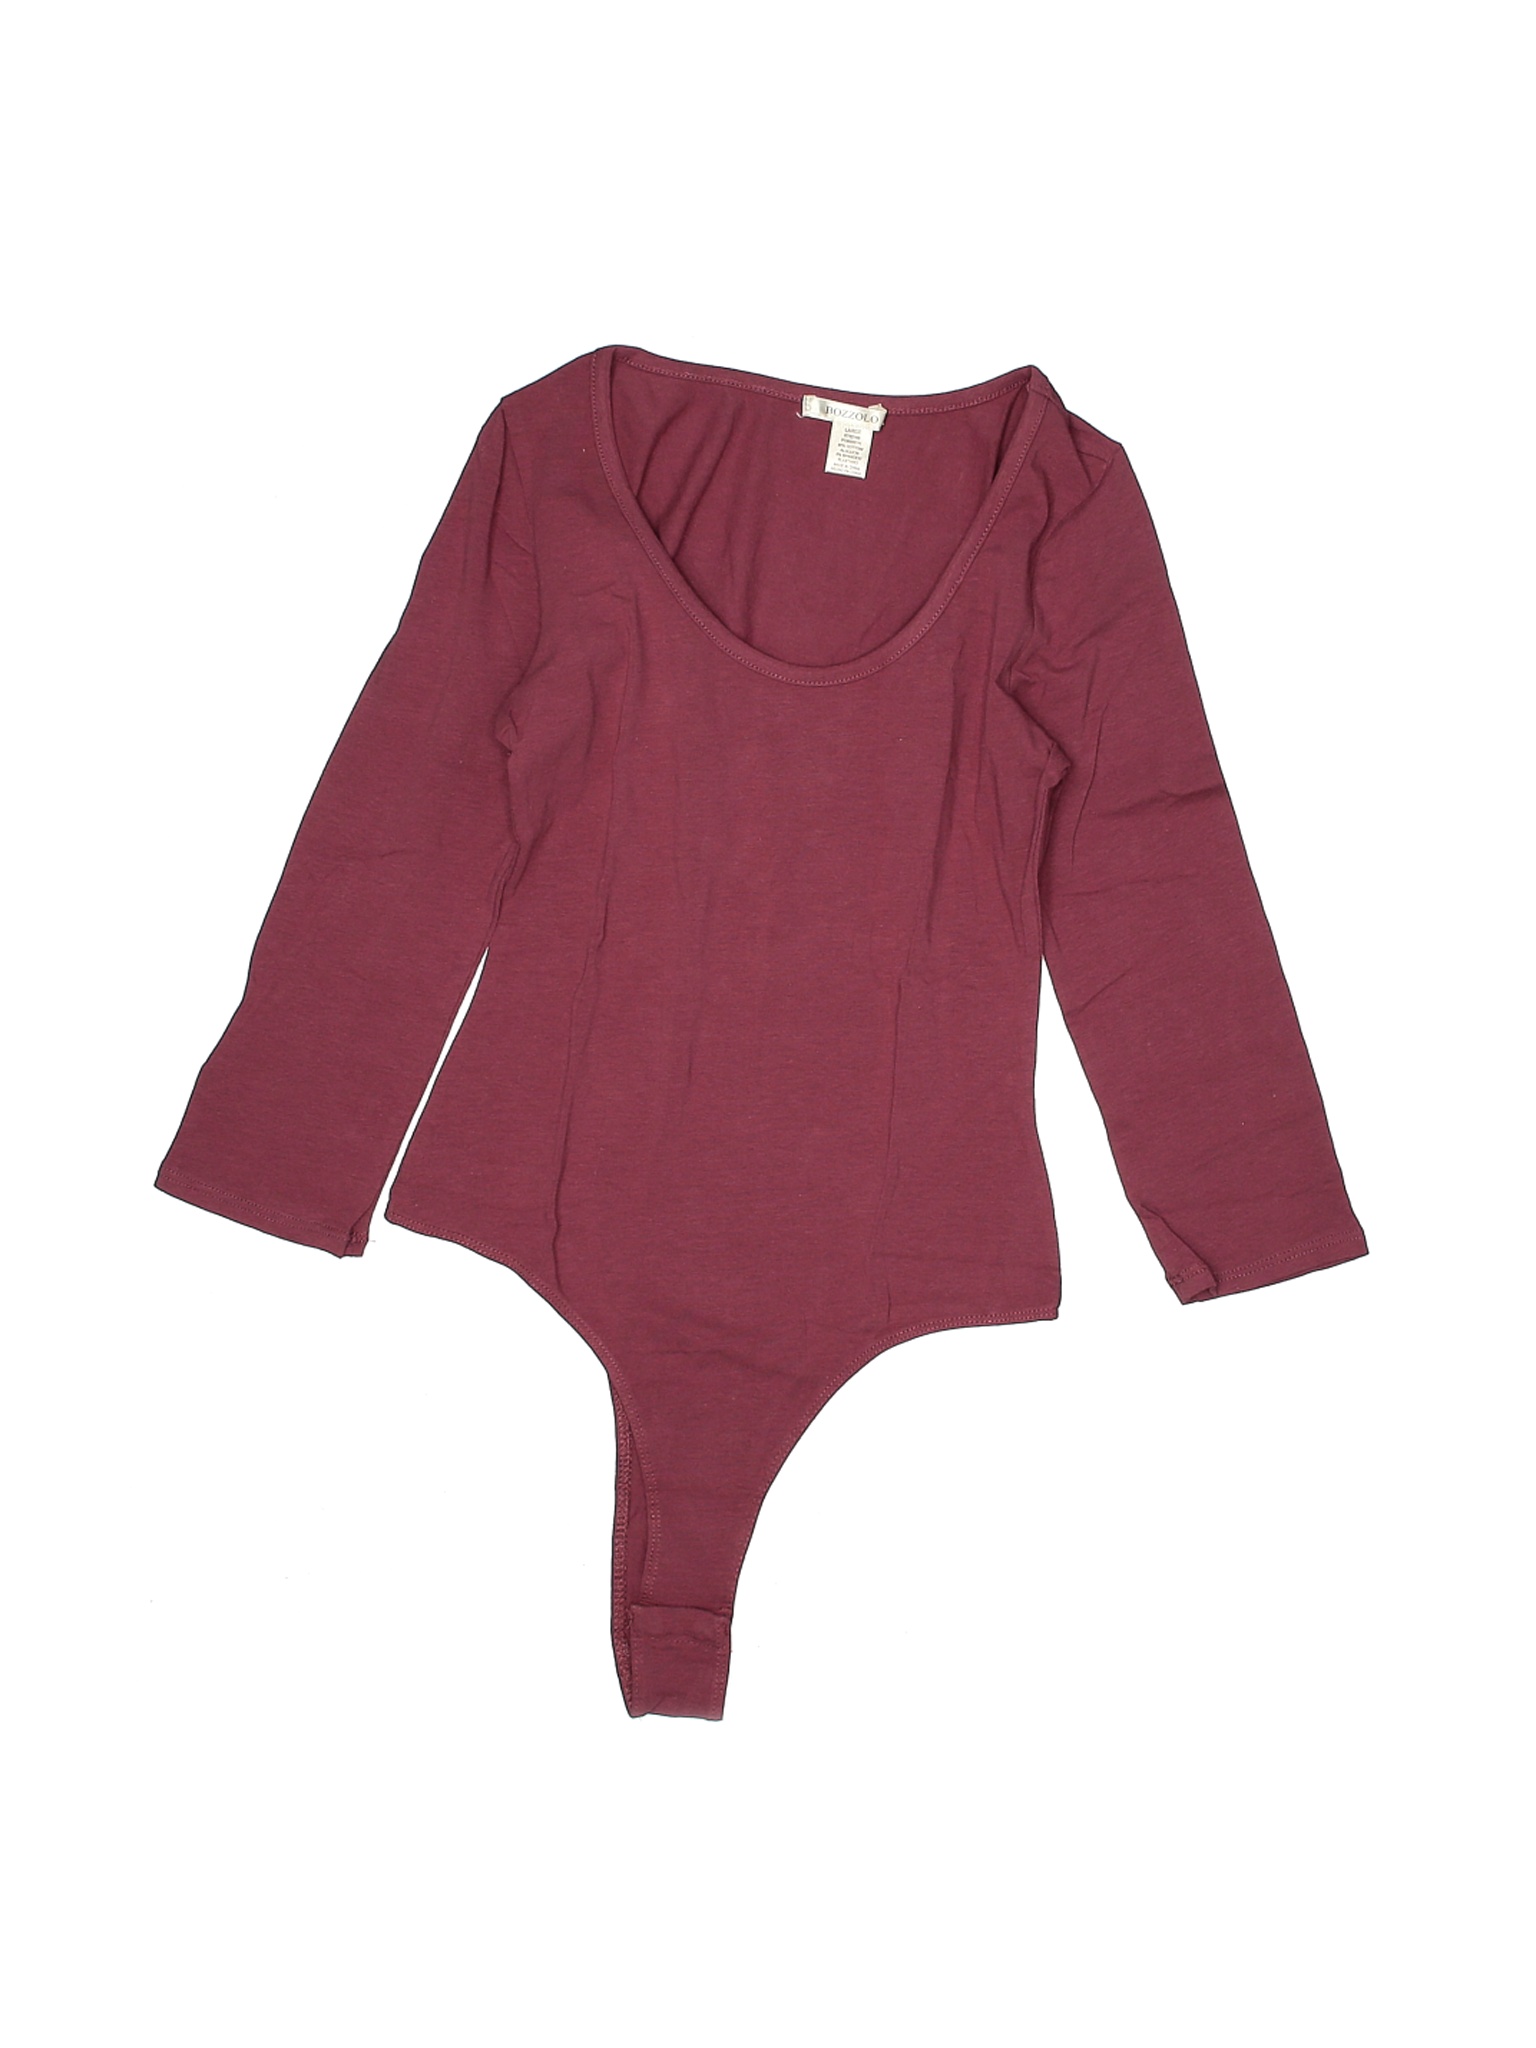 Bozzolo Solid Maroon Pink Bodysuit Size L - 66% off | thredUP